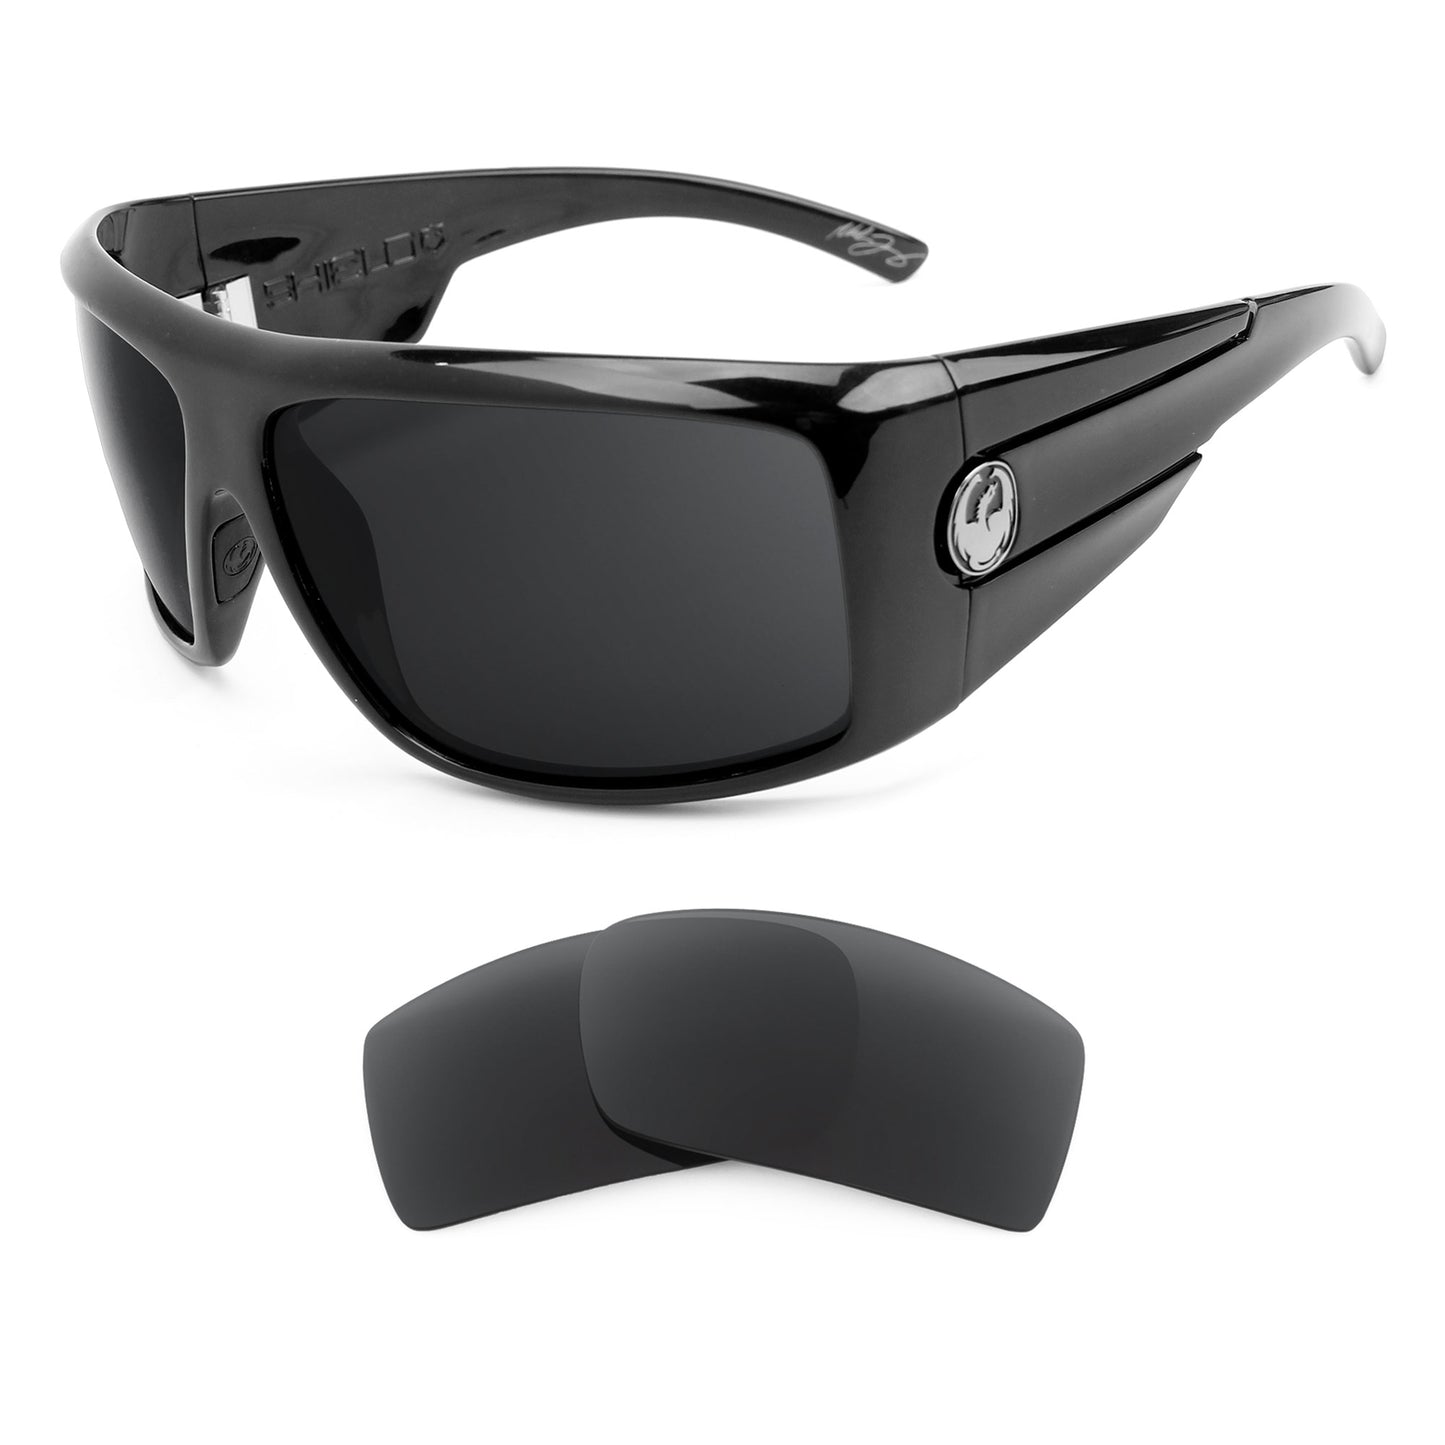 Dragon Shield sunglasses with replacement lenses